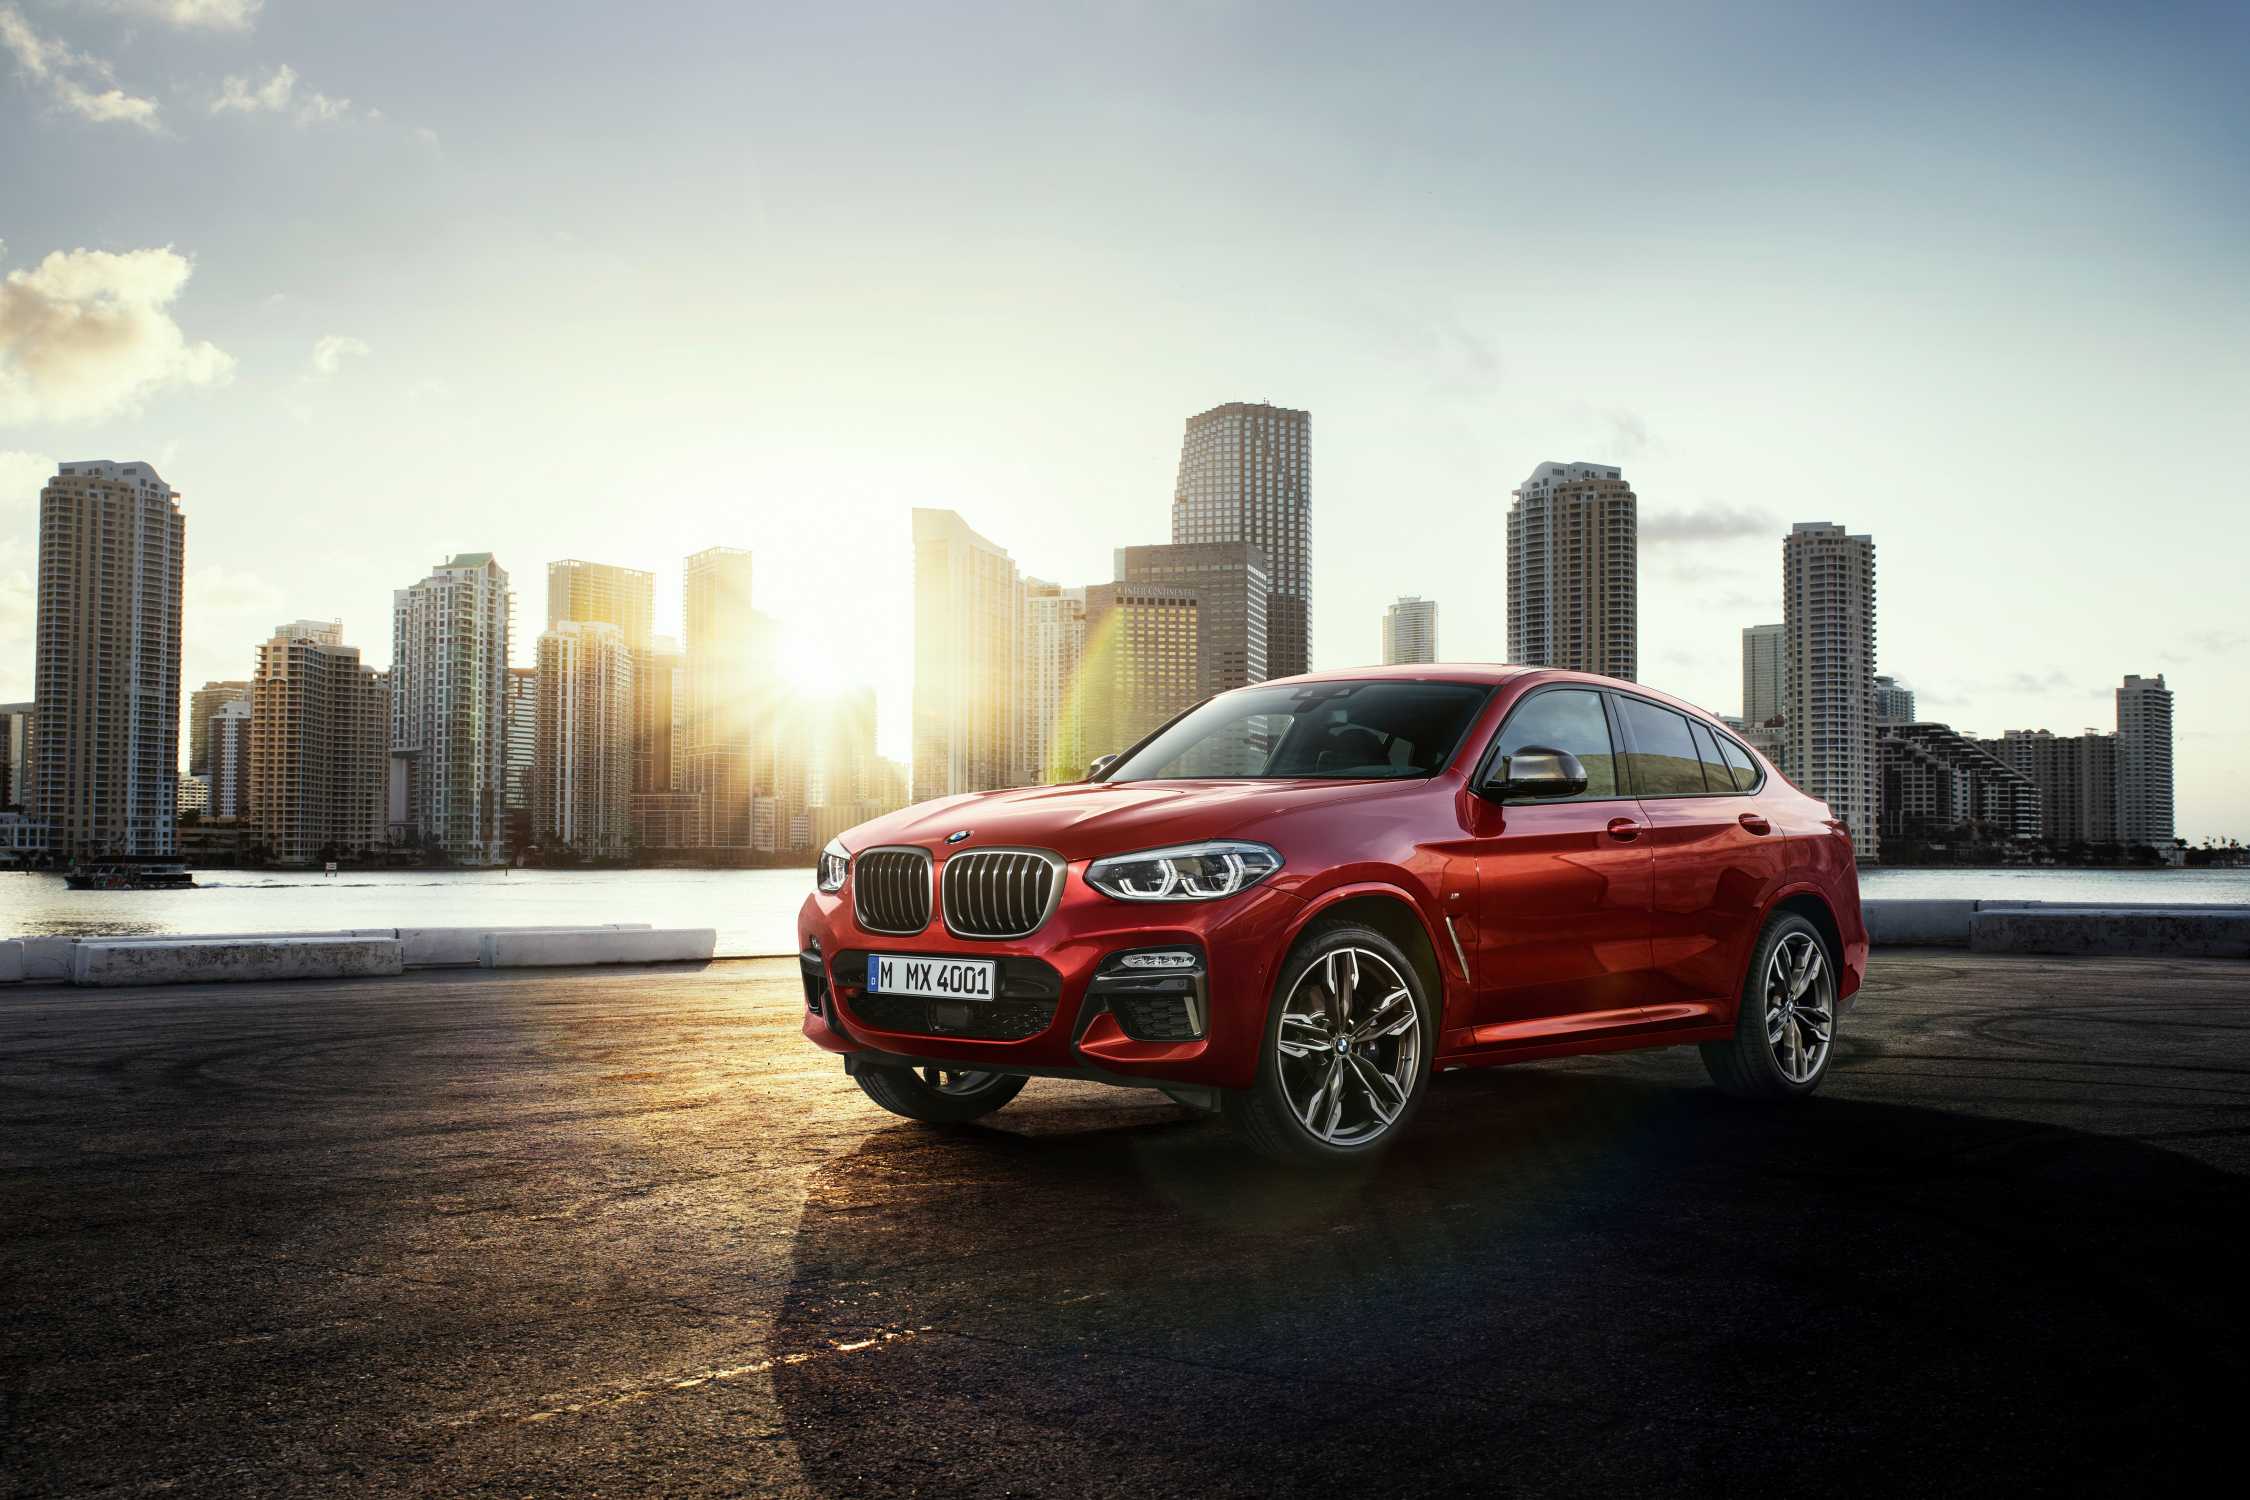 The all-new BMW X4 is coming.